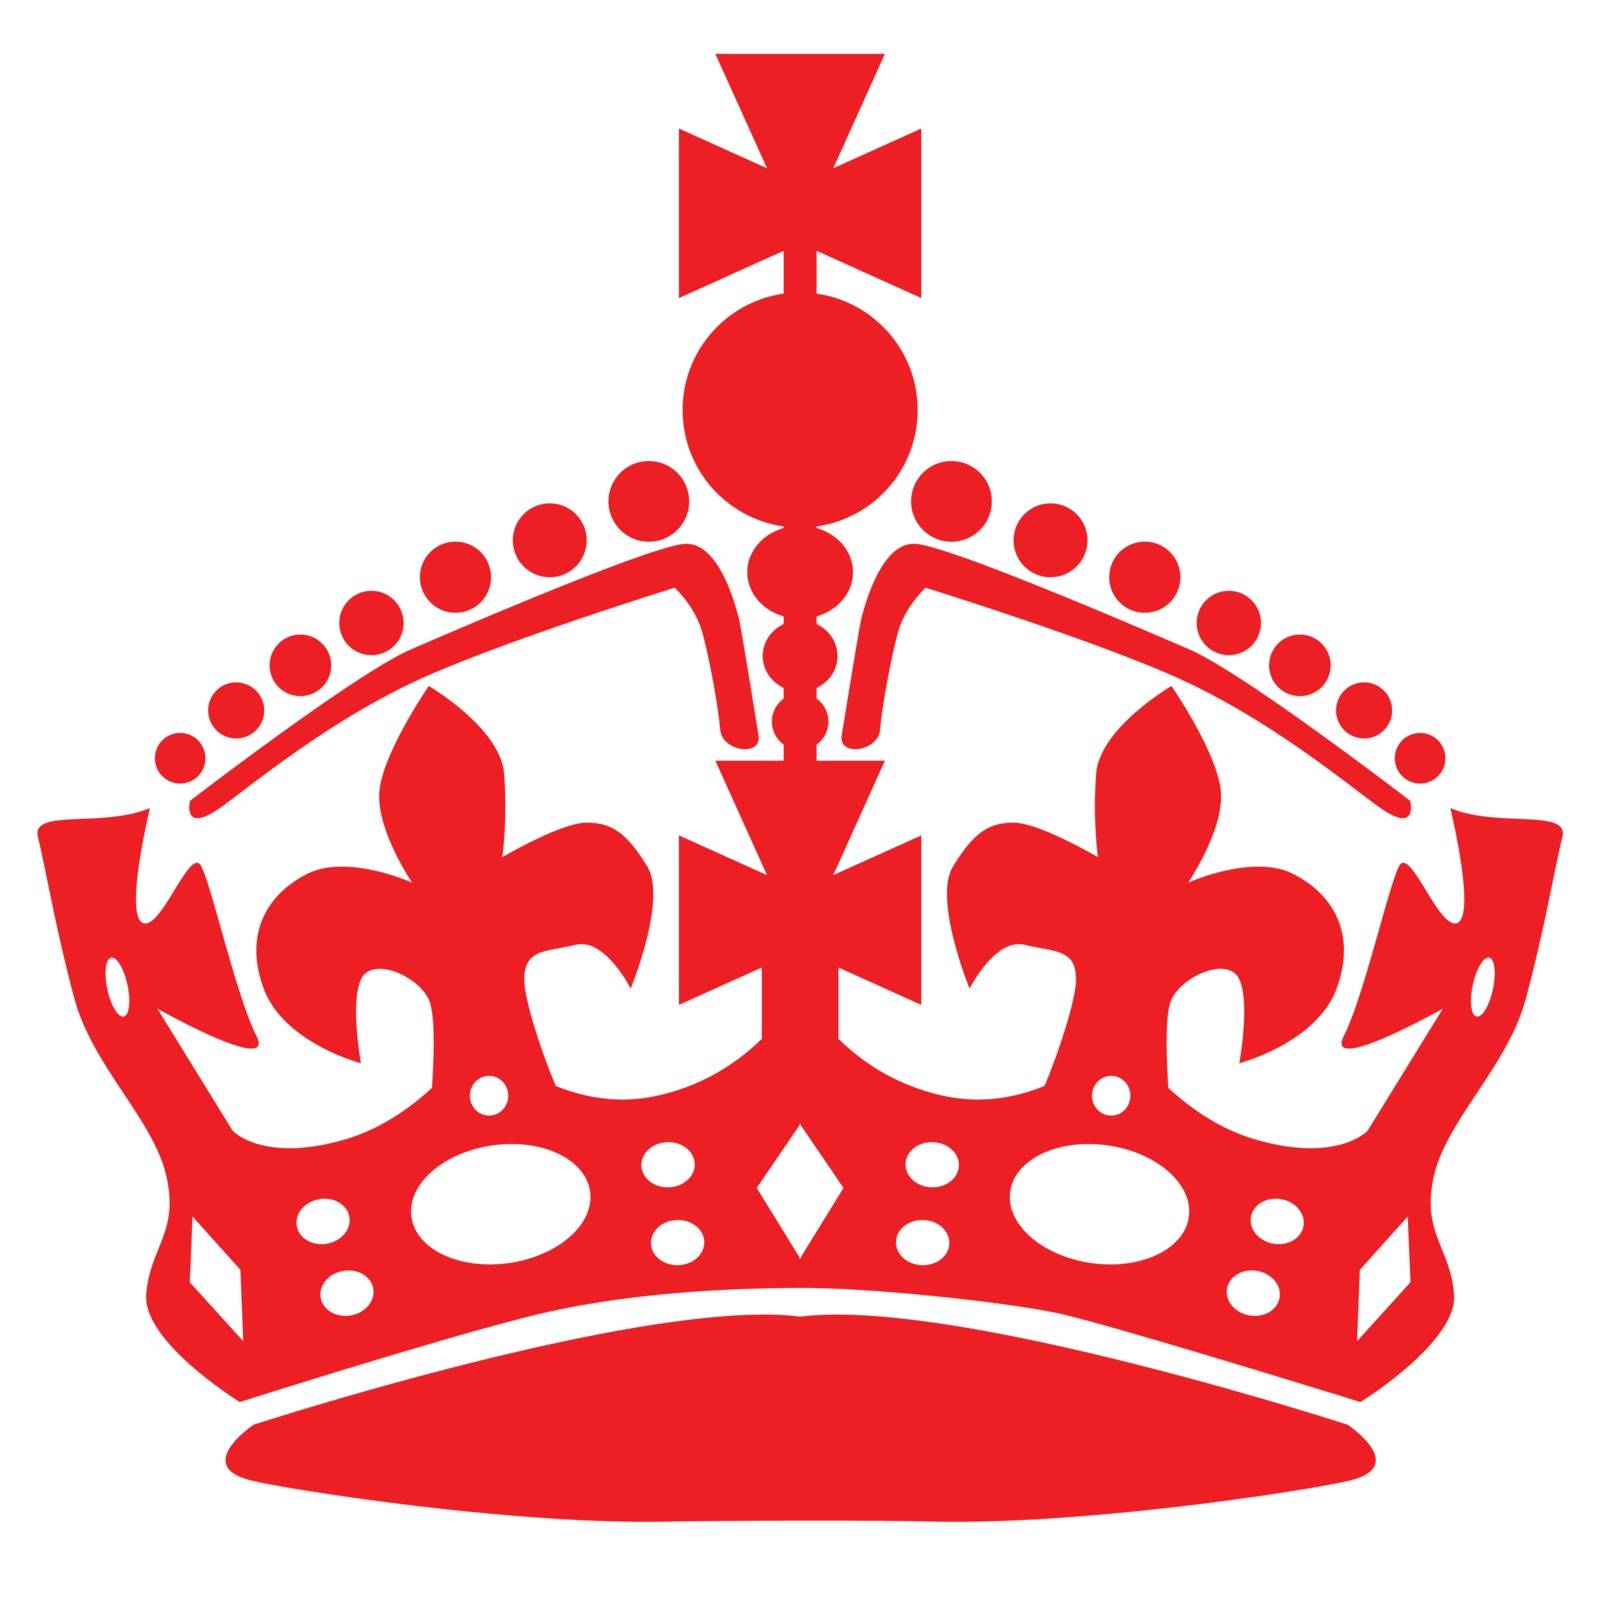 Crown as used in stay calm material over a white background